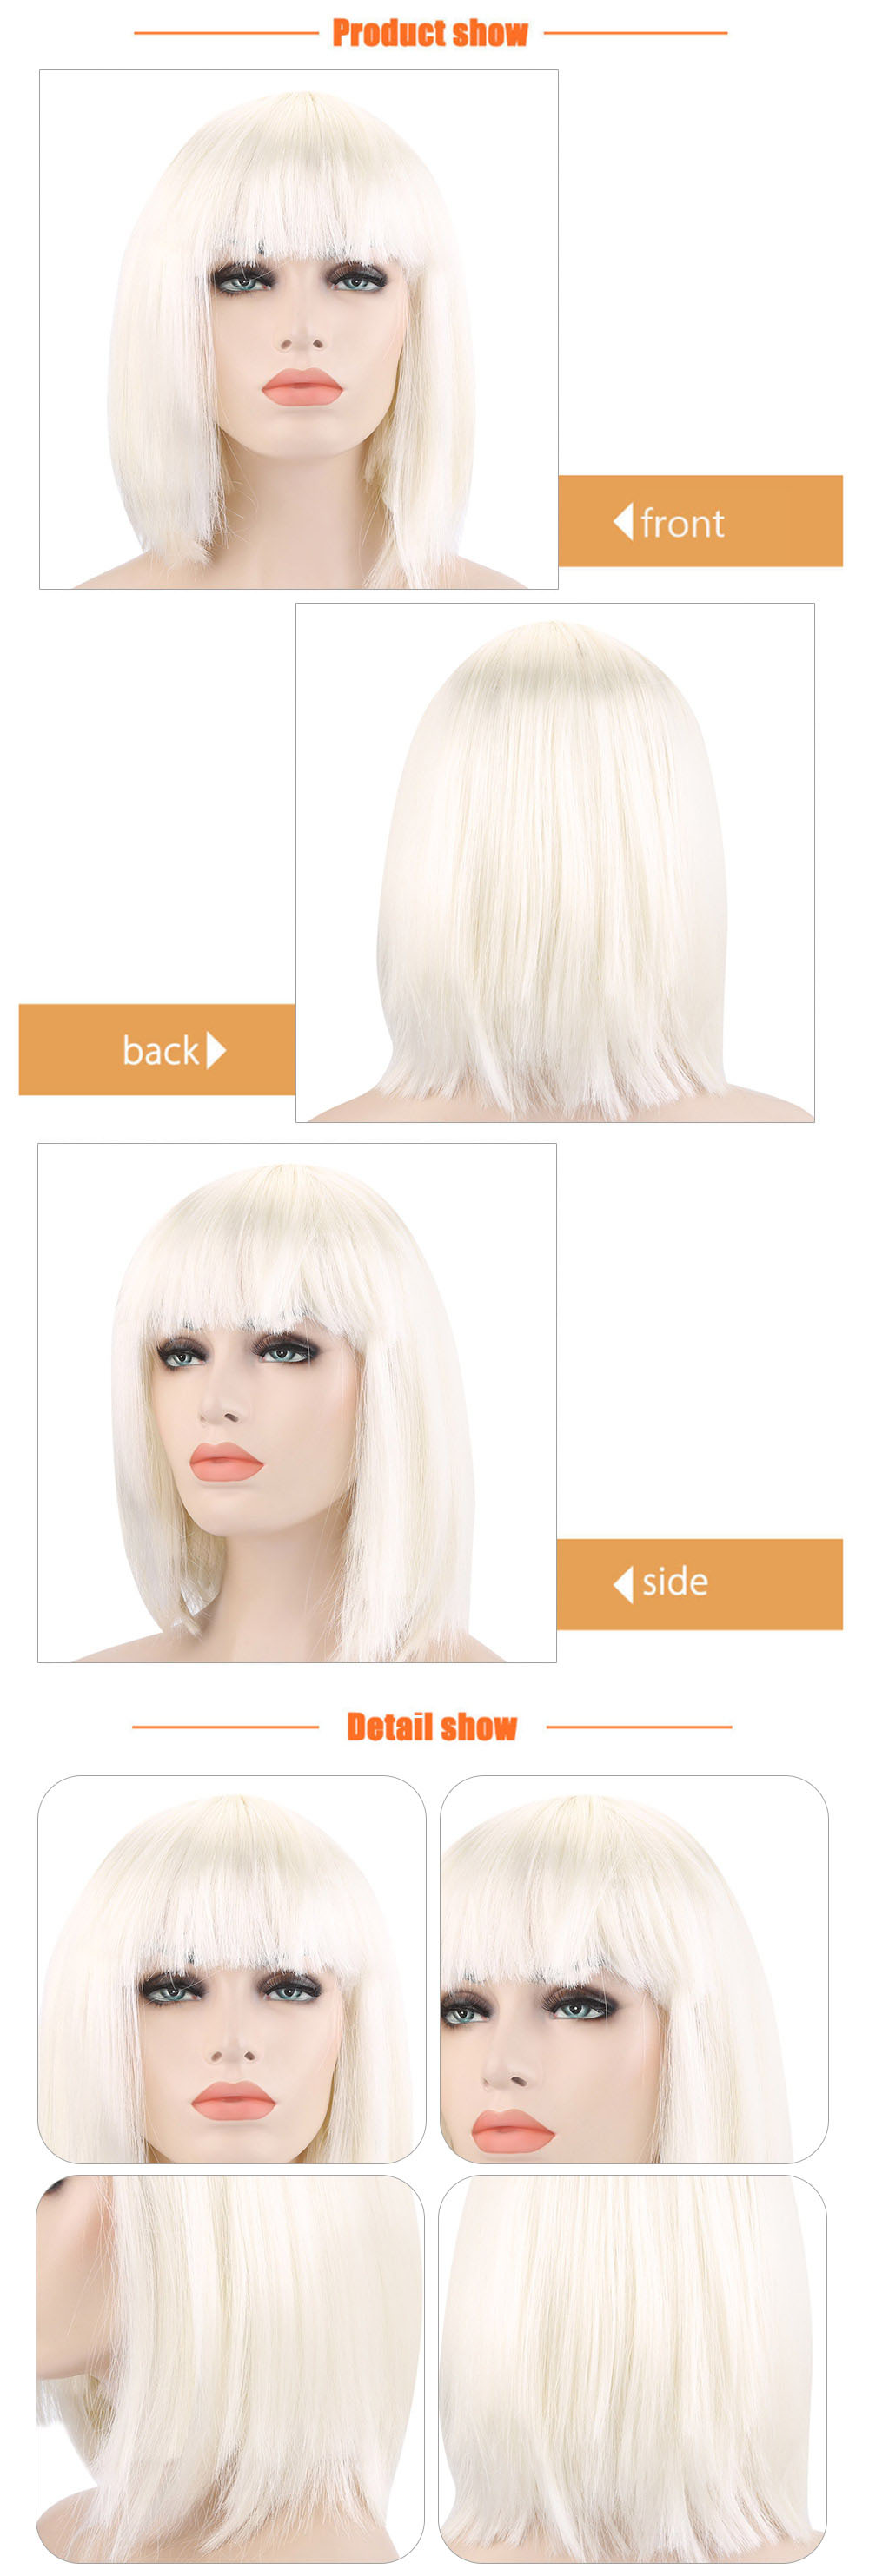 Bob Full Bangs Short Straight Off-white Wigs for Street Shooting Cosplay Masquerade